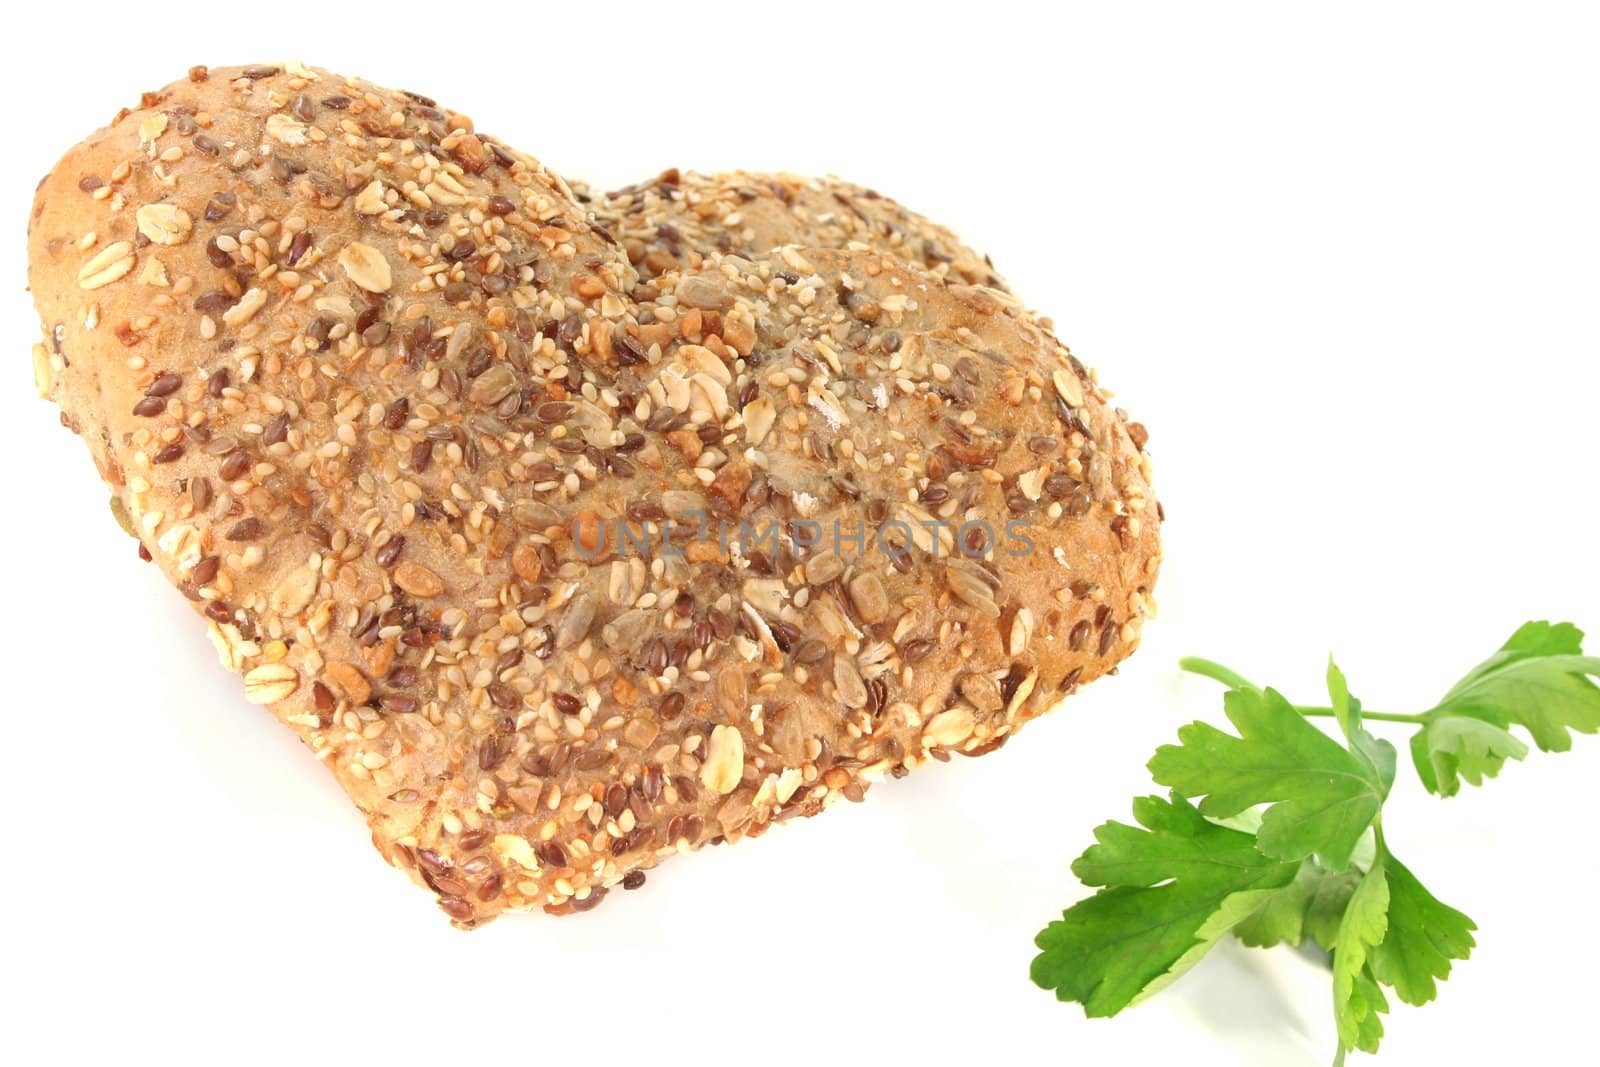 Whole grain bread into heart shape with parsley on a white background